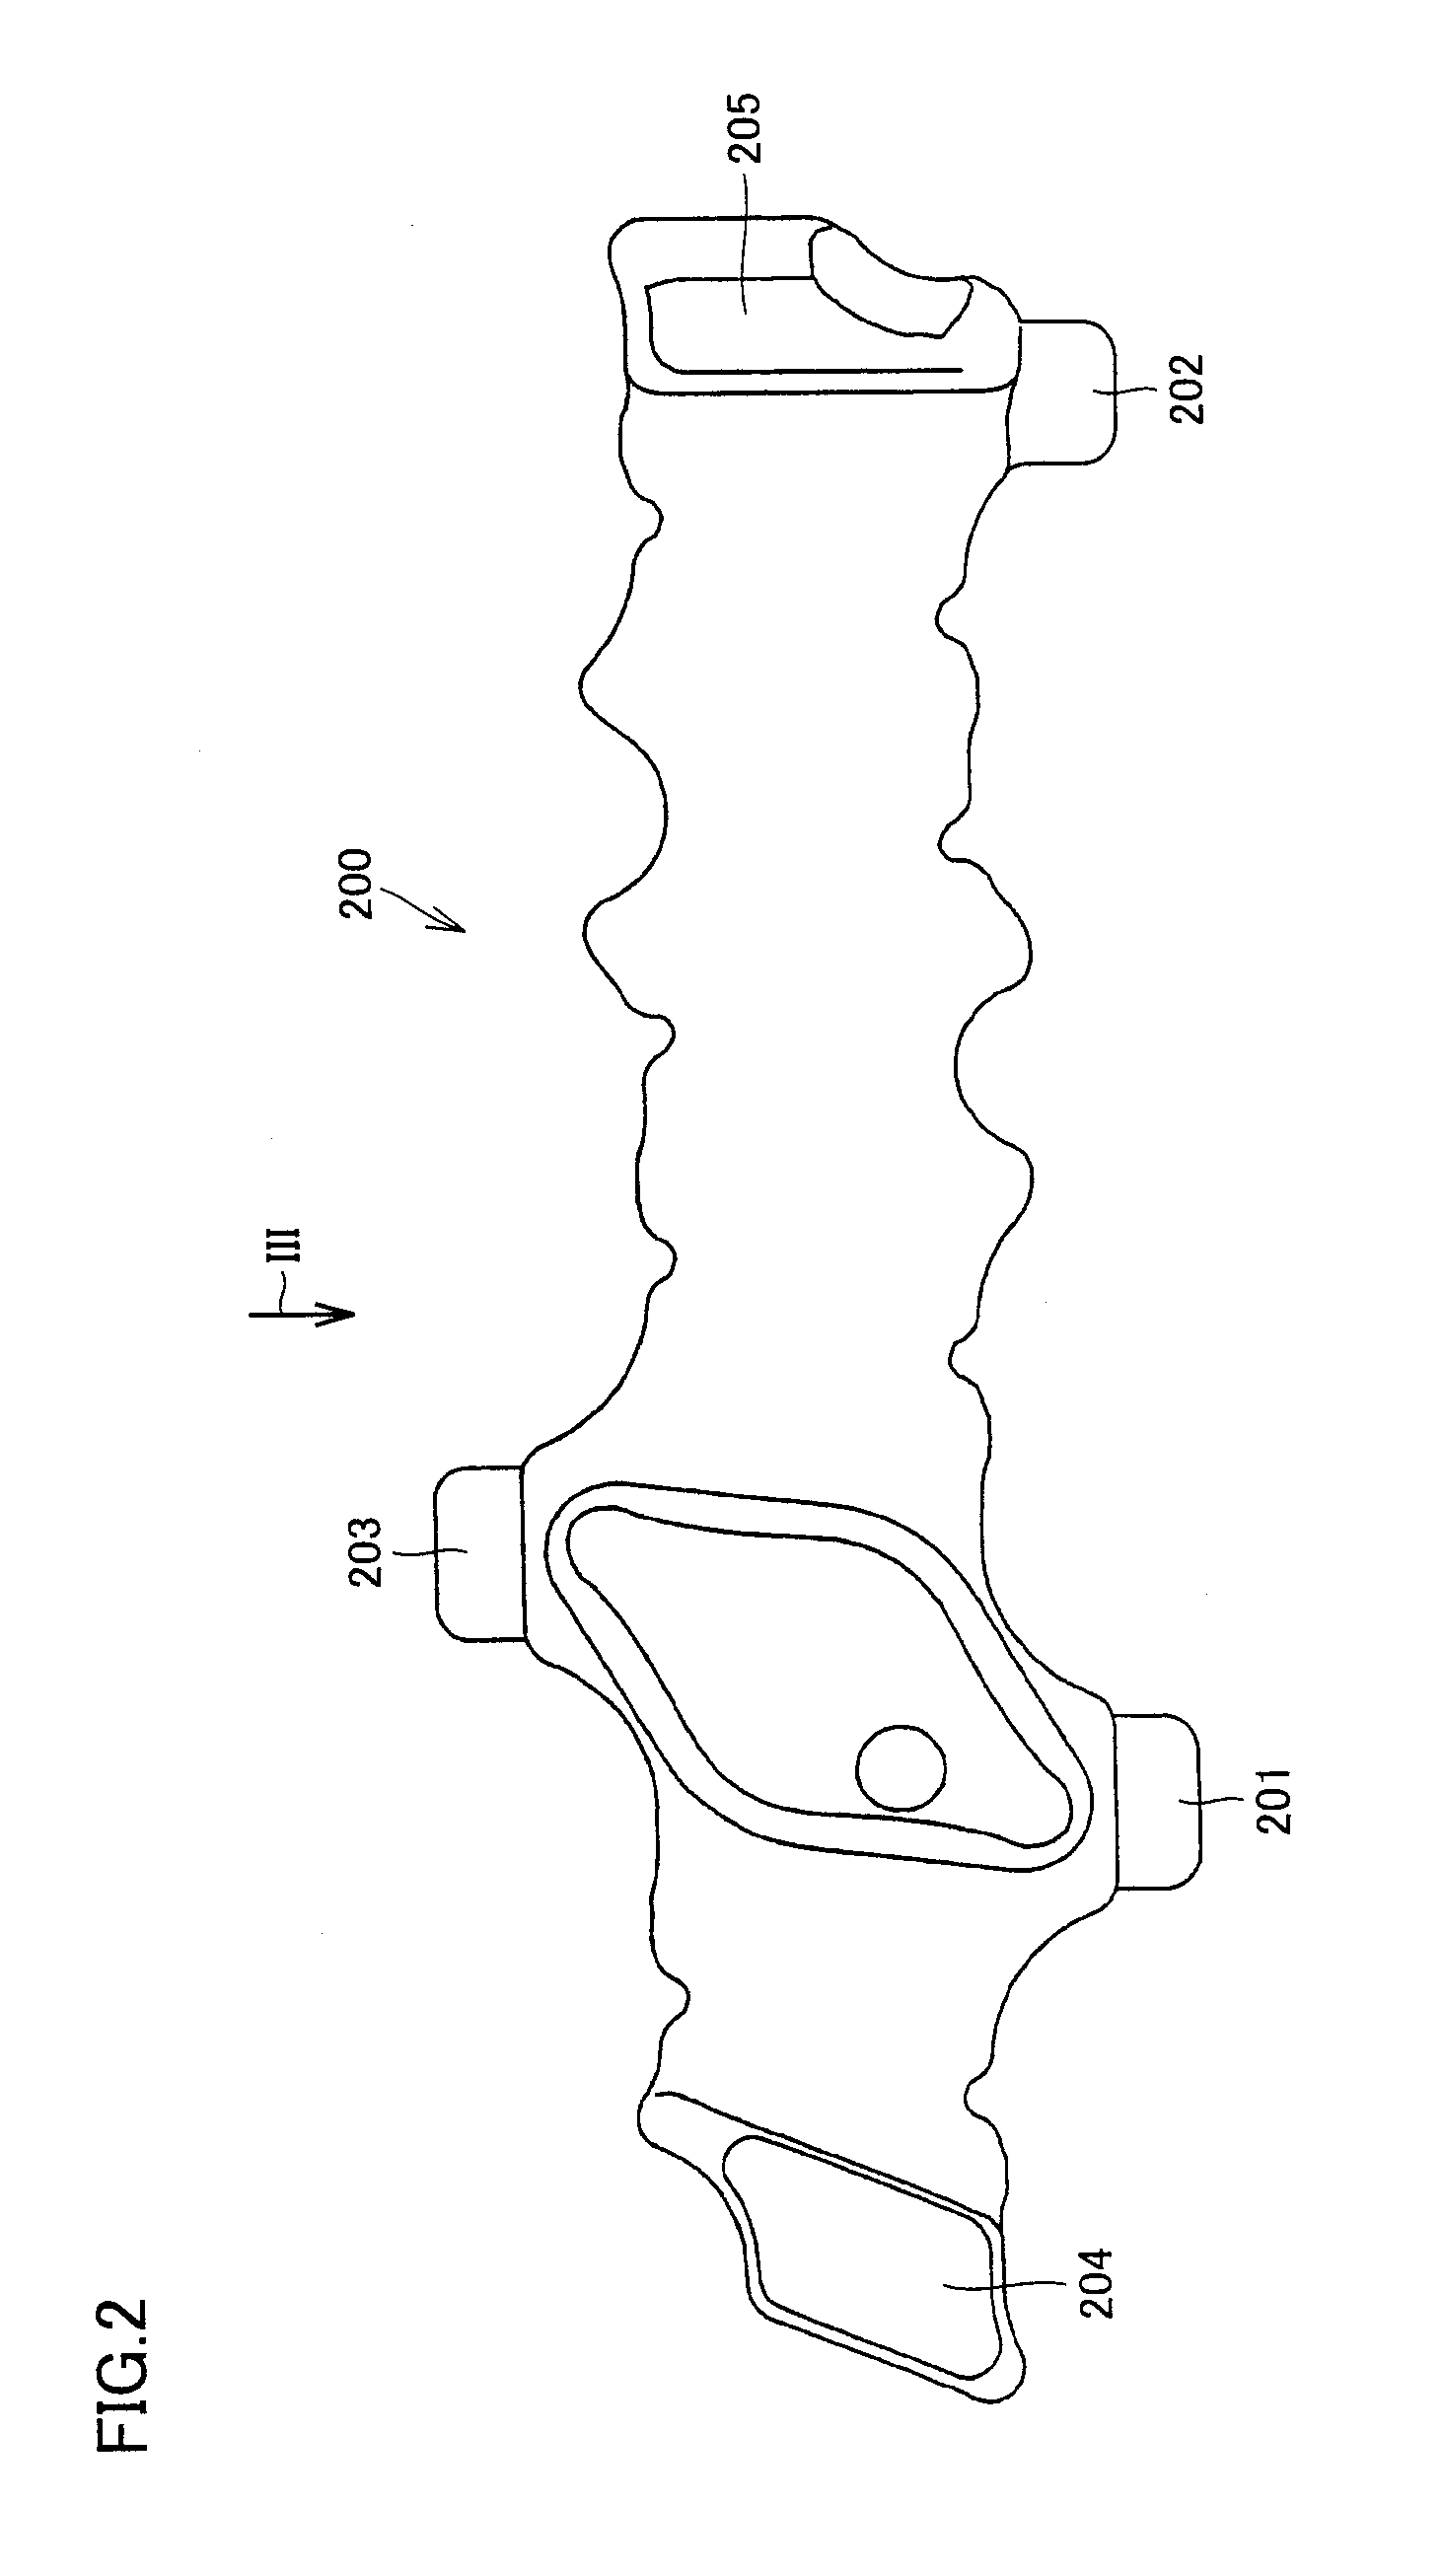 Sound insulation structure of internal combustion engine